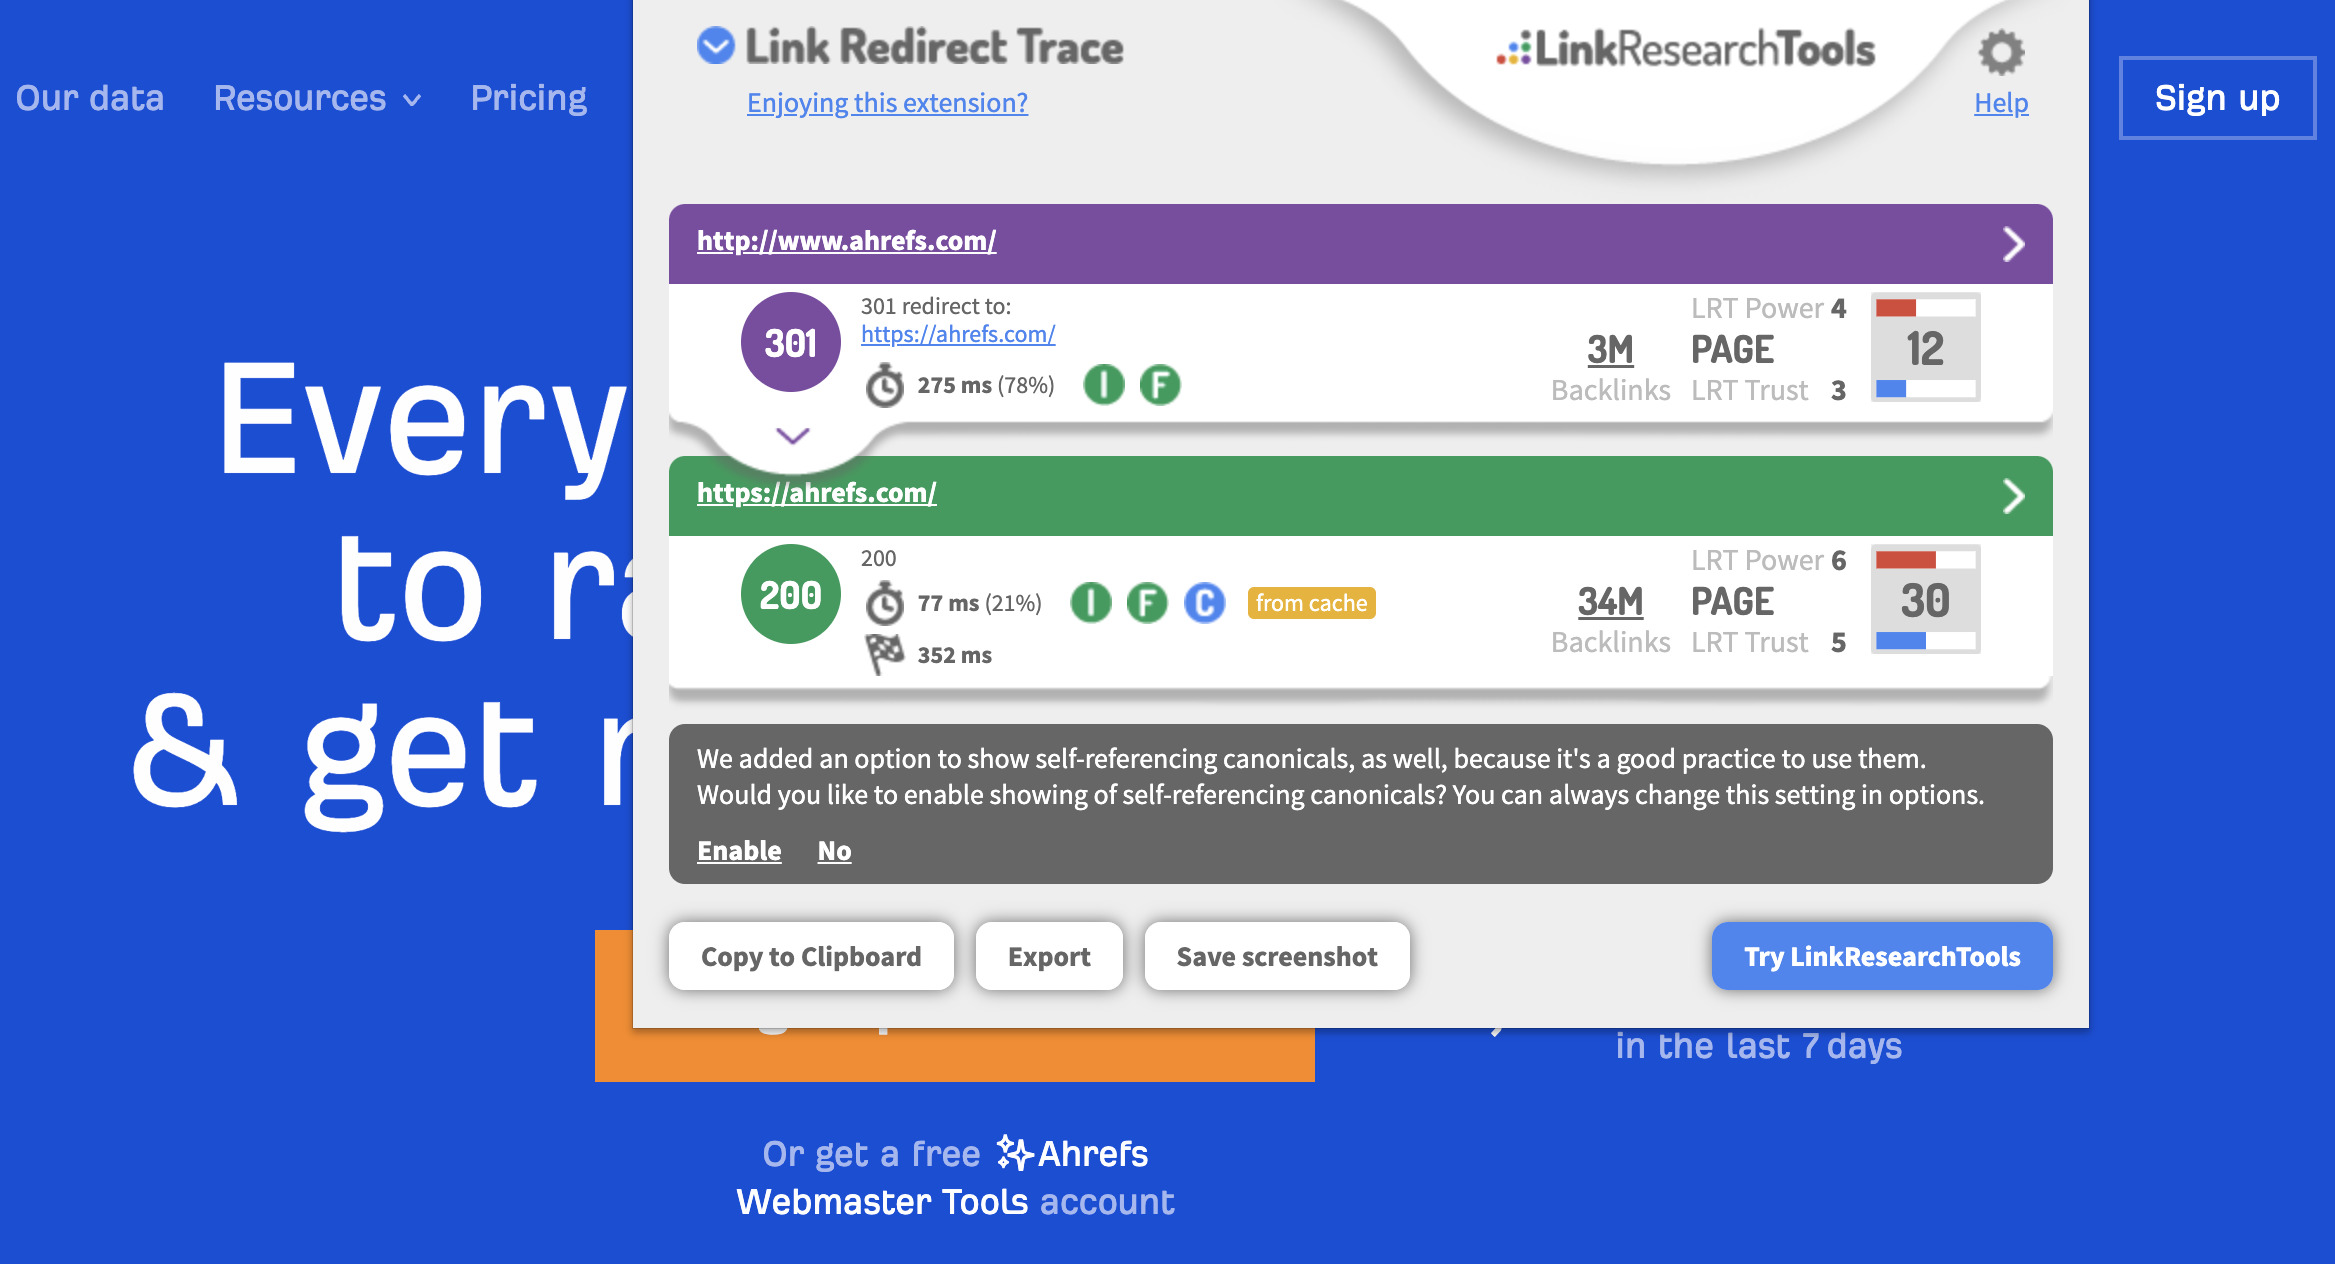 Link Redirect Trace
